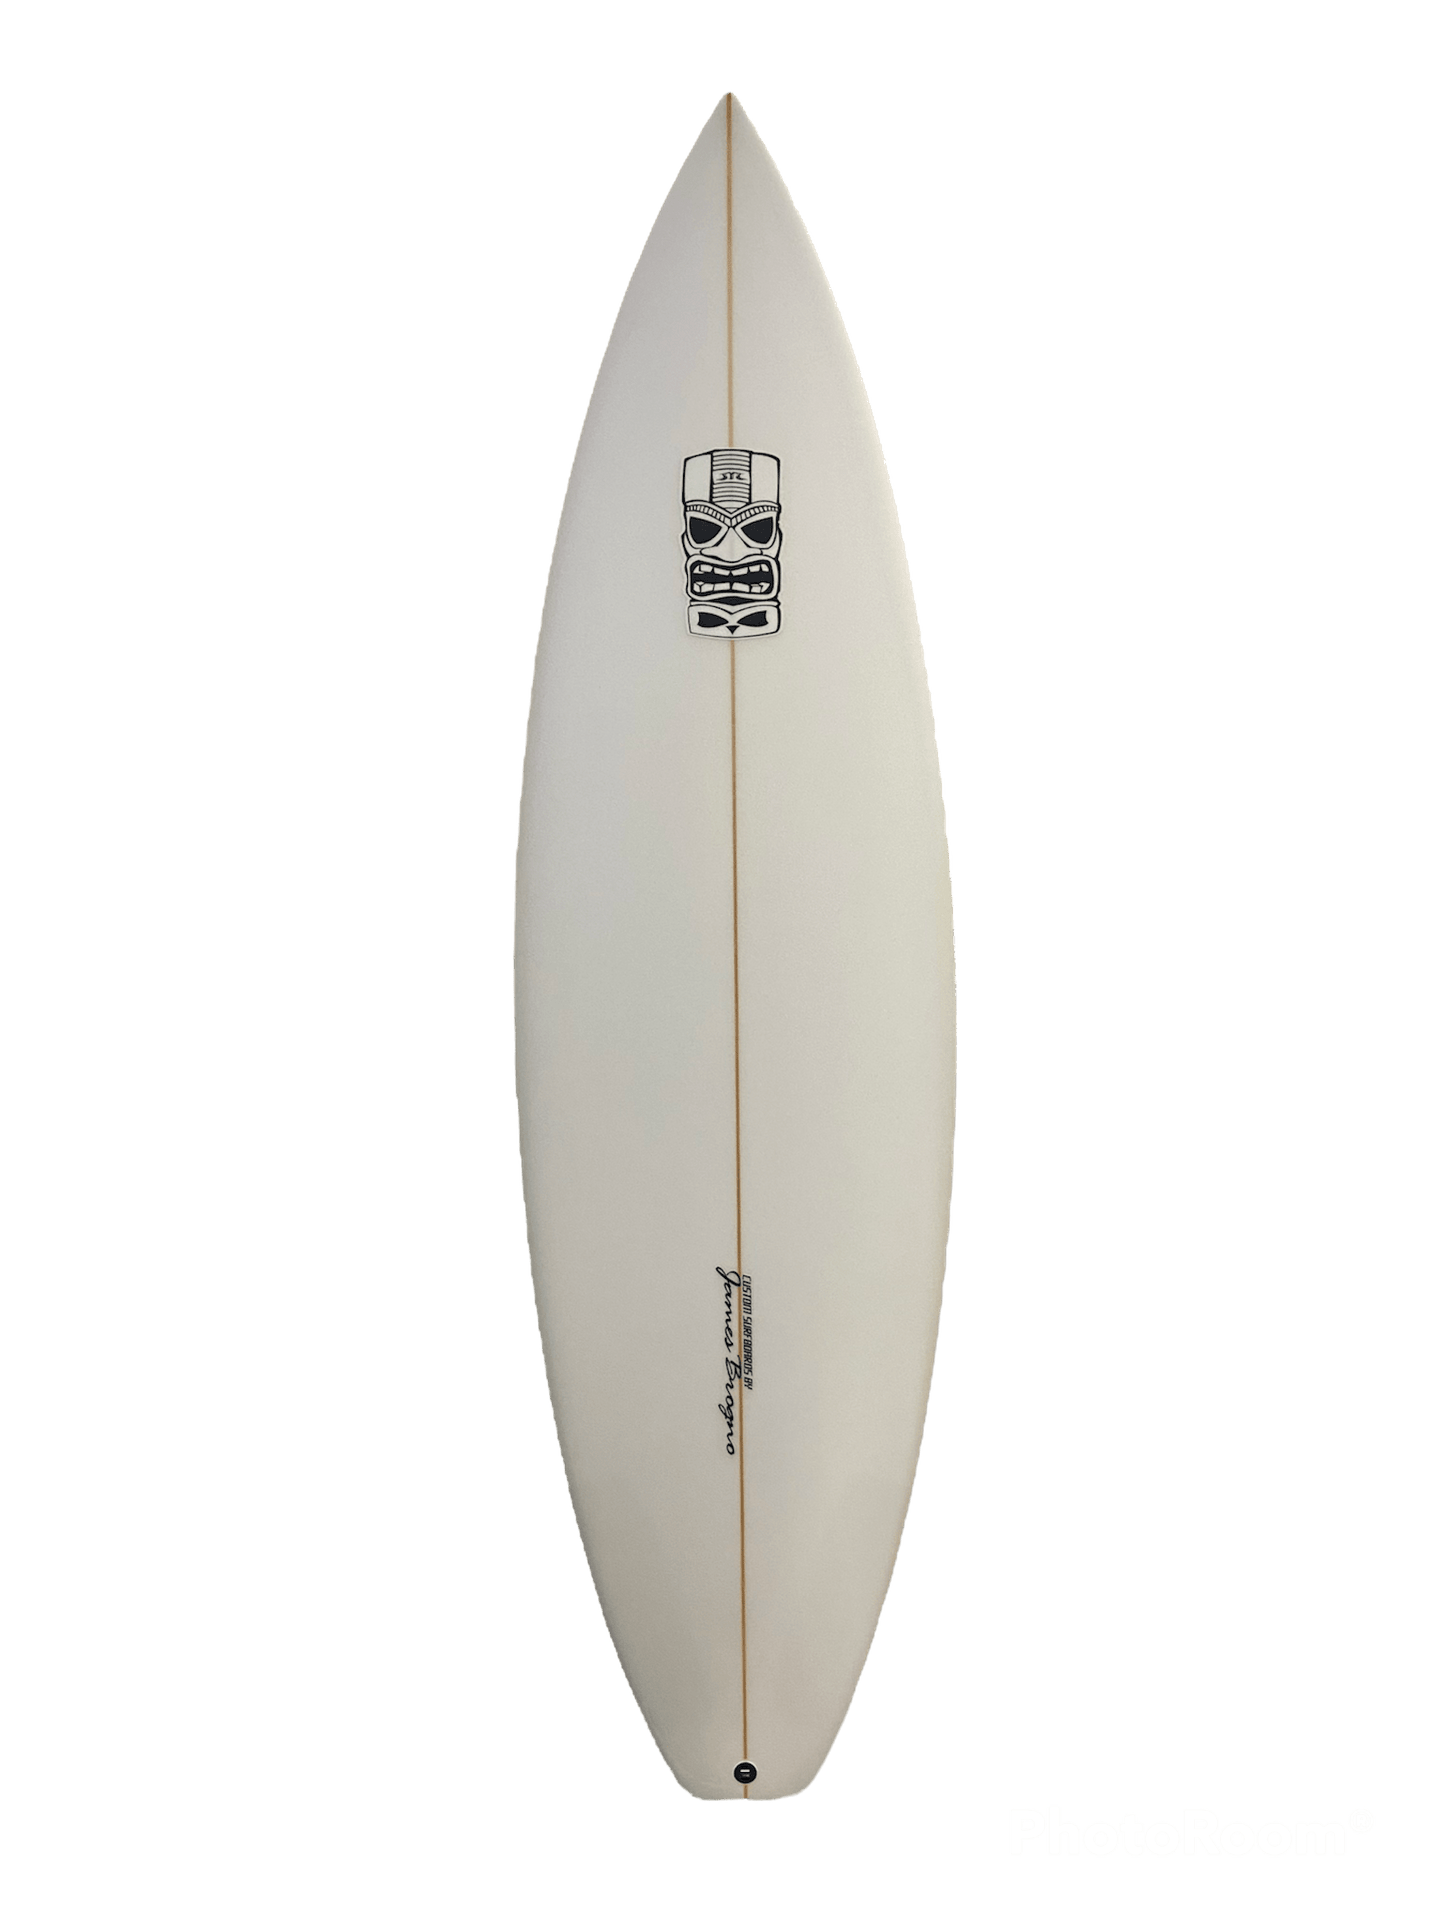 5'10 Muzzy Squash Tail Short Board Surfboards